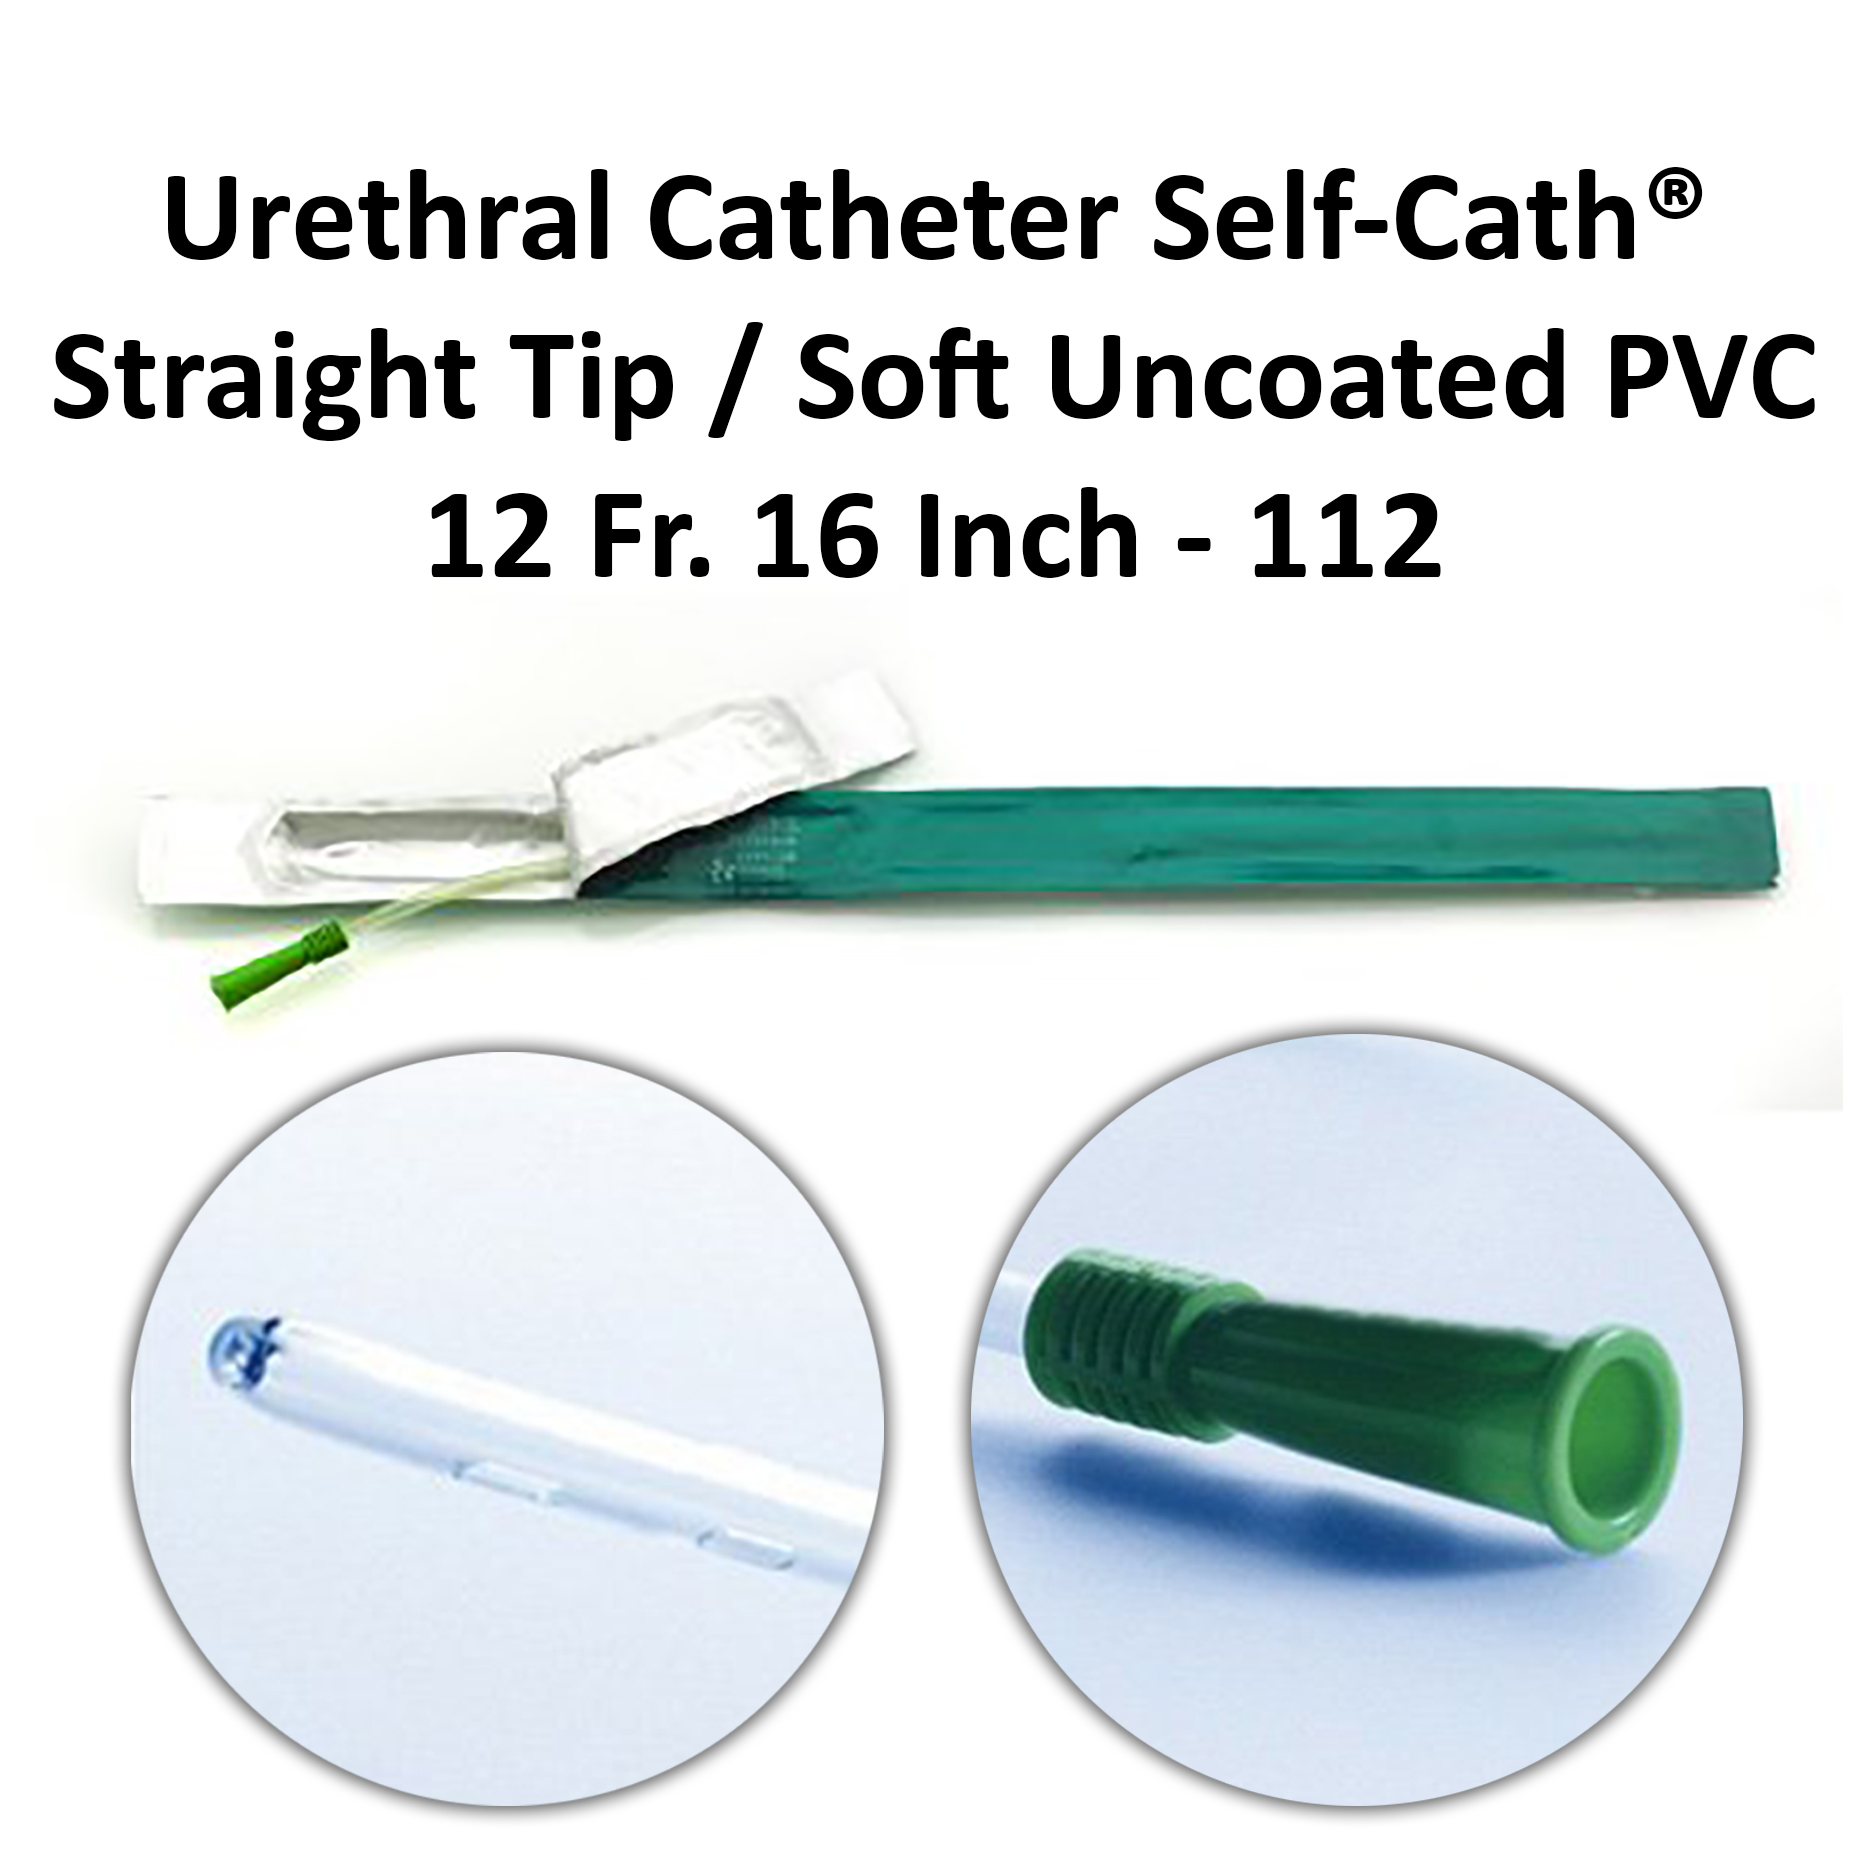 Urethral Catheter Self-Cath® Straight Tip / Soft Uncoated PVC 12 Fr. 16 Inch - 112